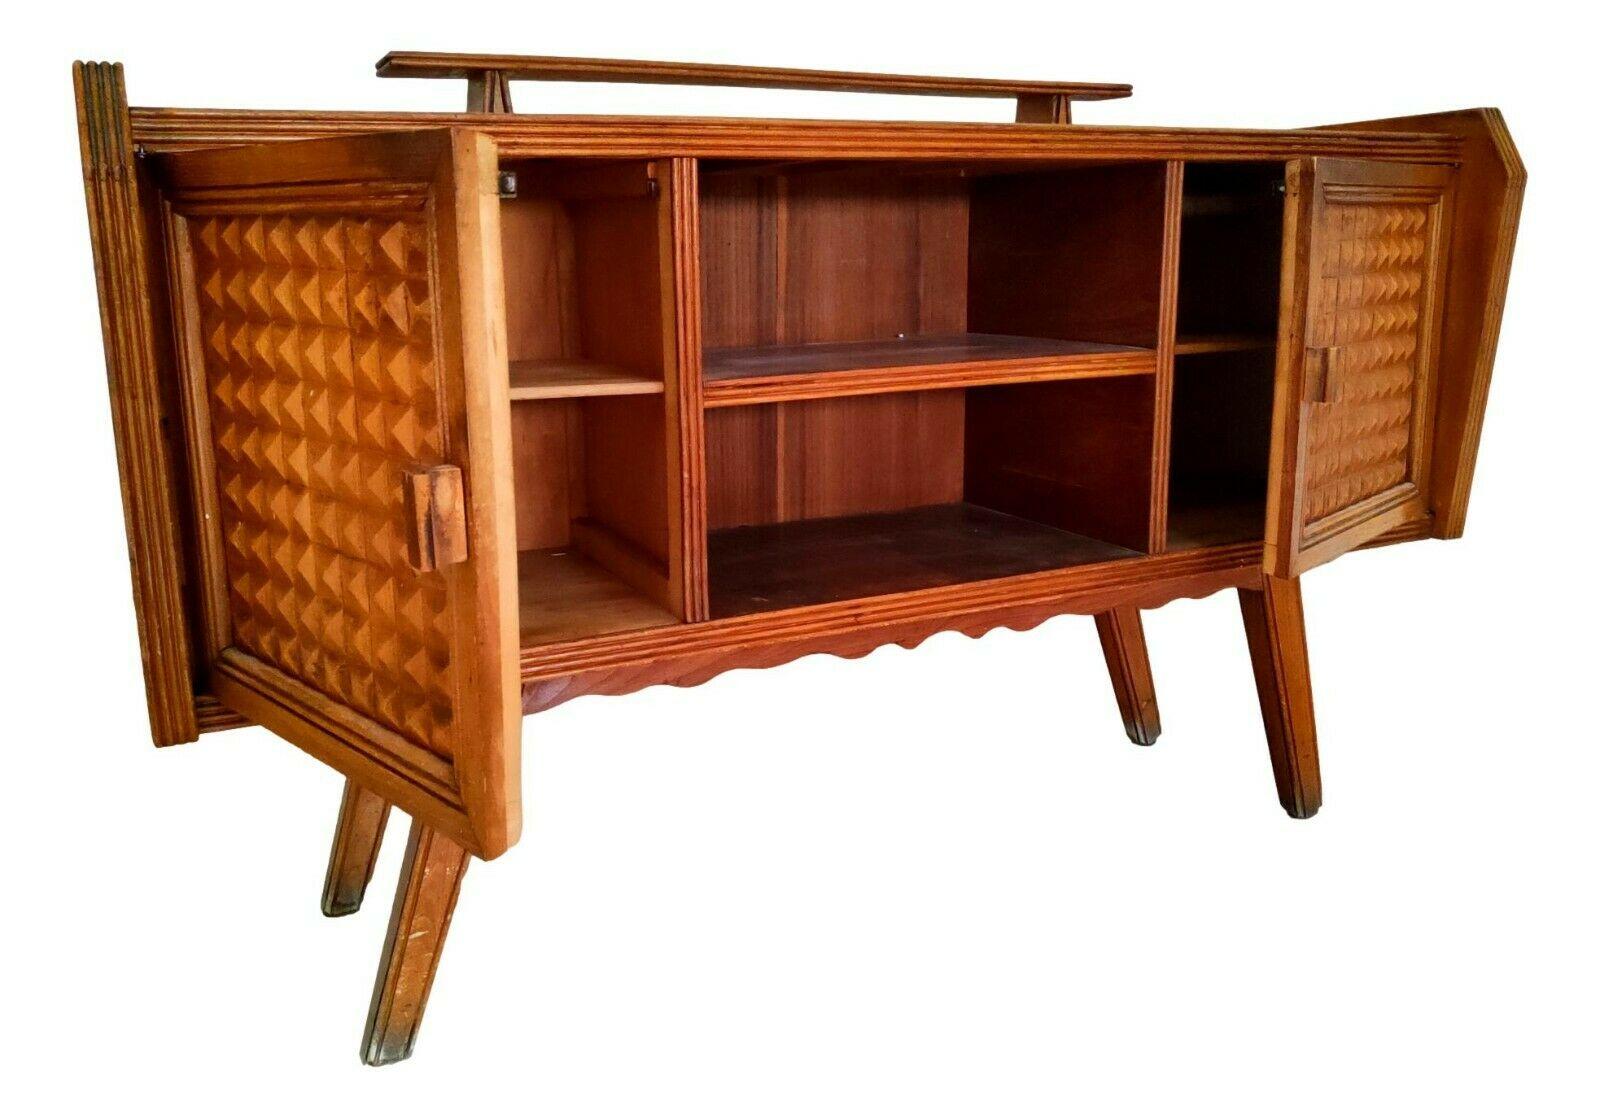 Splendid original sideboard from the 60s, design by paolo buffa, with small upper riser

It measures approximately 160 cm in length, 46 cm in width, 90 cm in height (part of the cabinet) - 100 cm in height including riser

Two openable